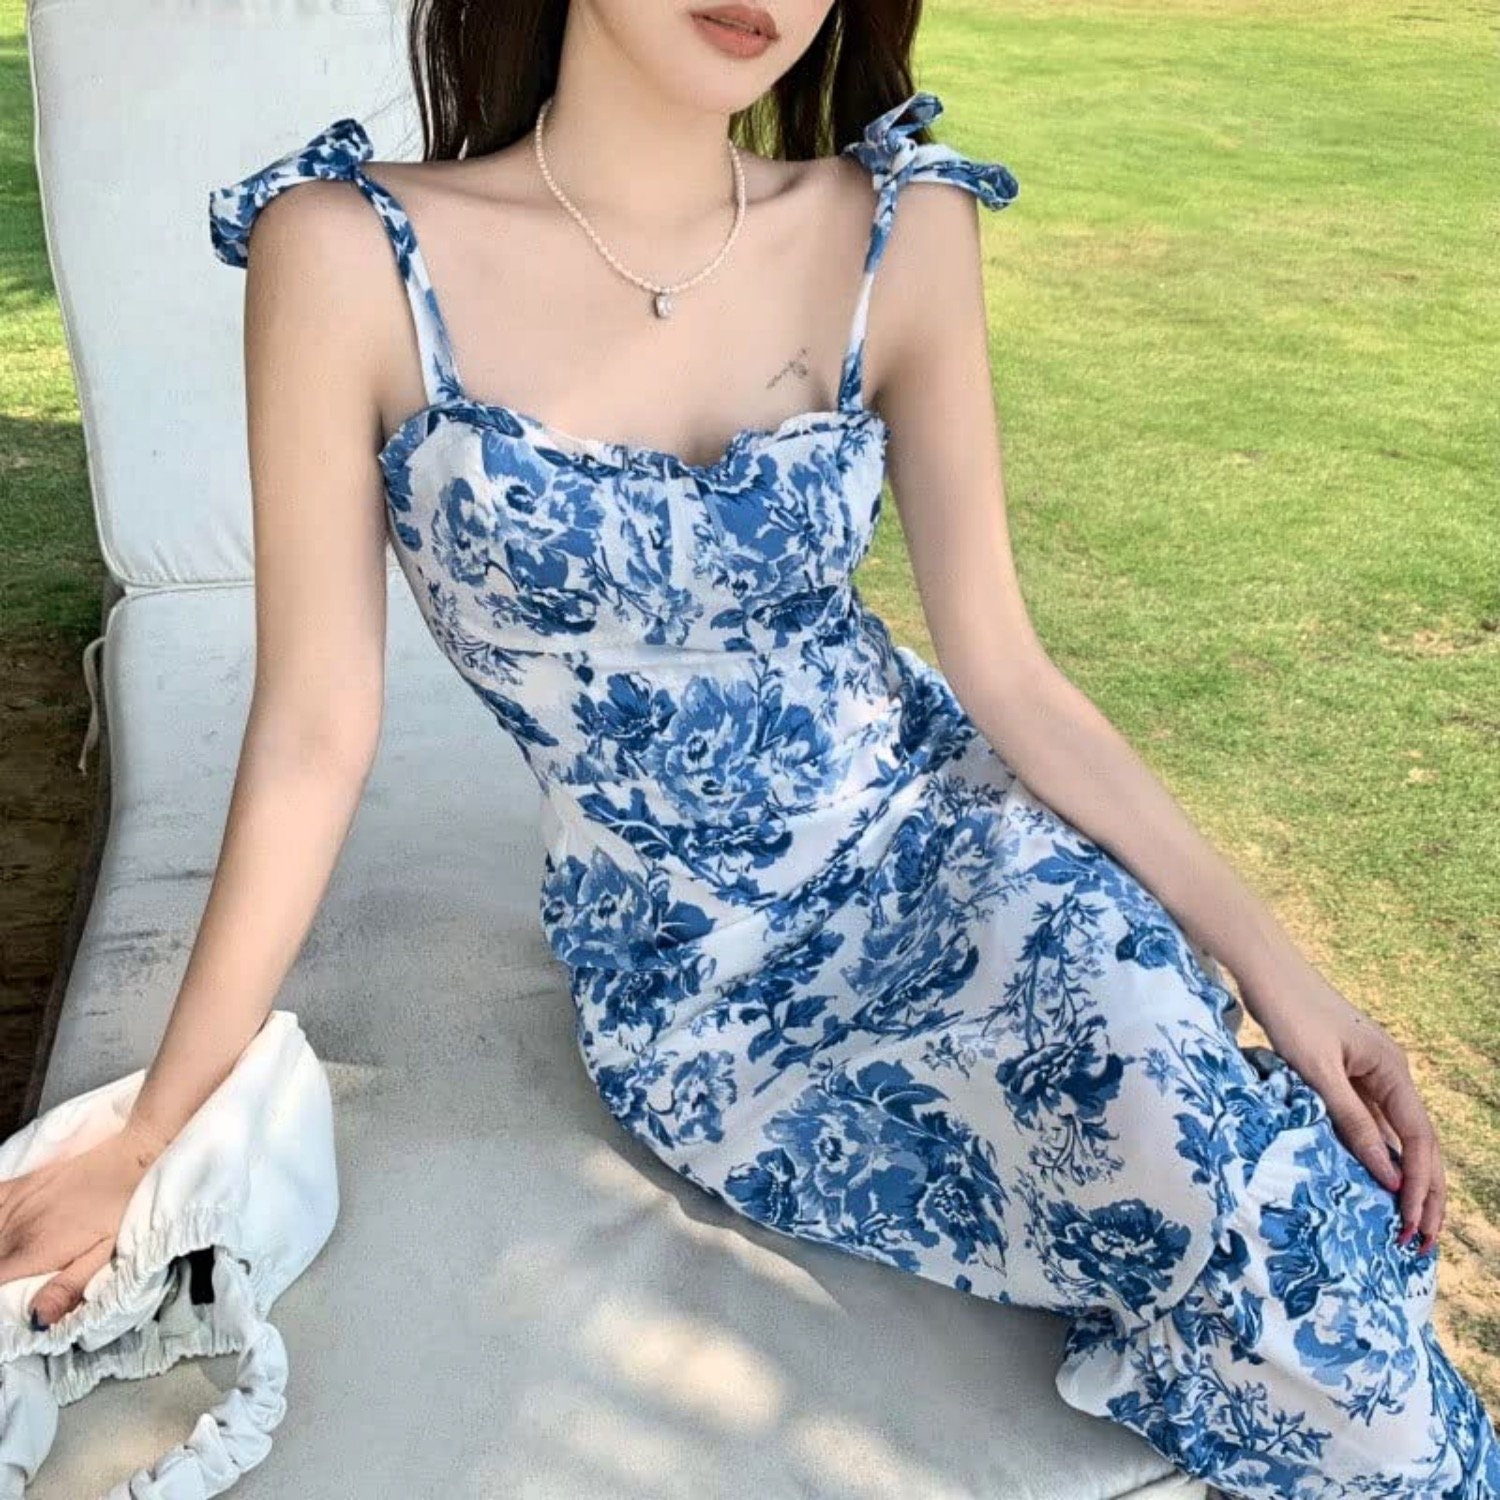 Women's New Fashion French Blue White Floral Dresses - Etsy